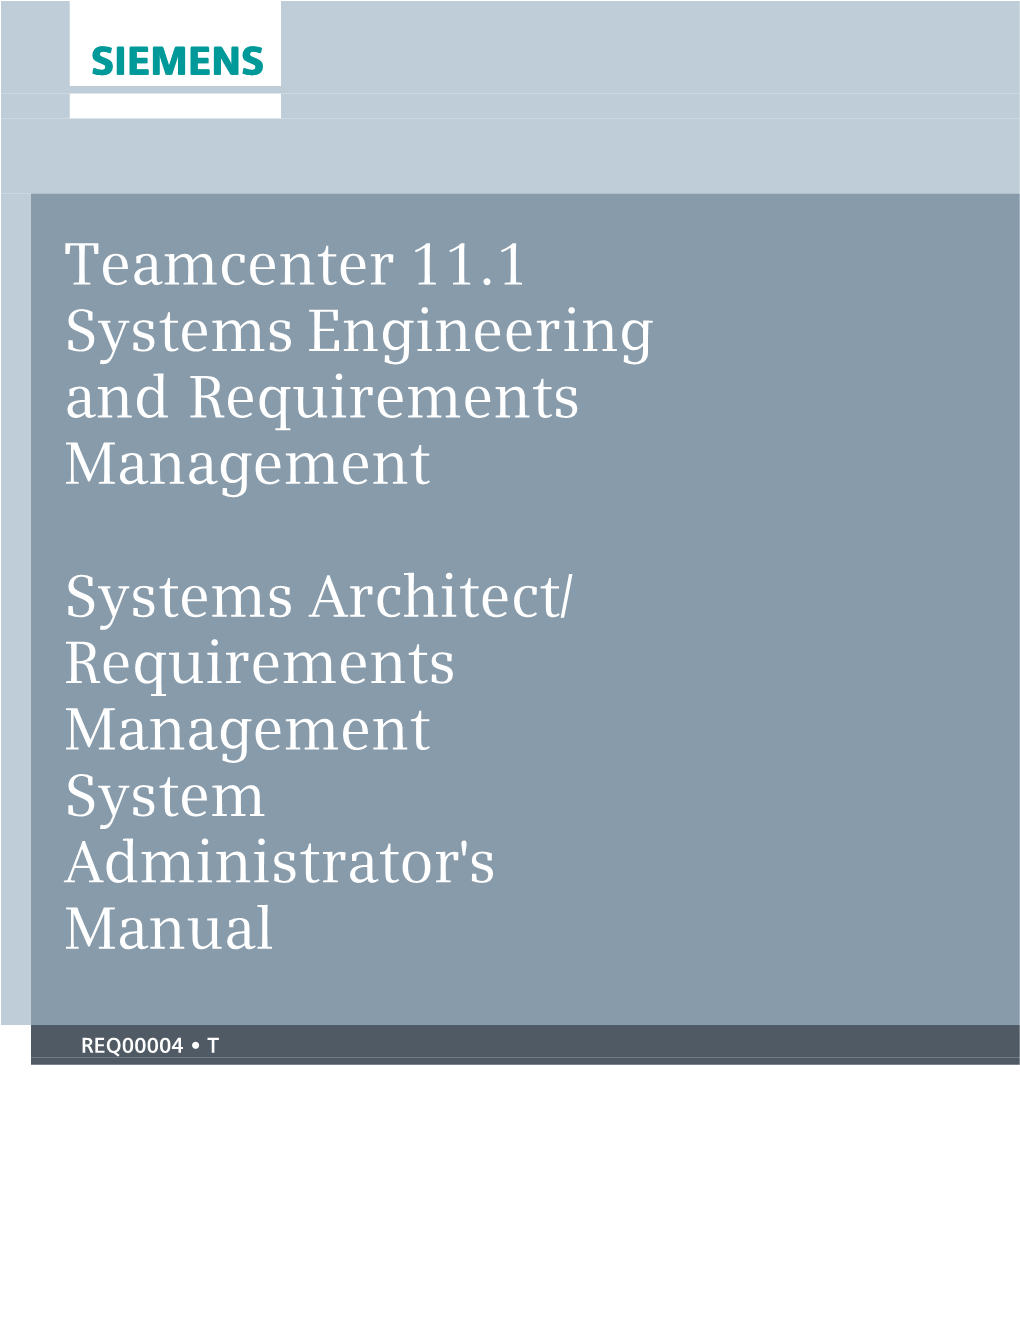 Tcse 11.1 System Administration